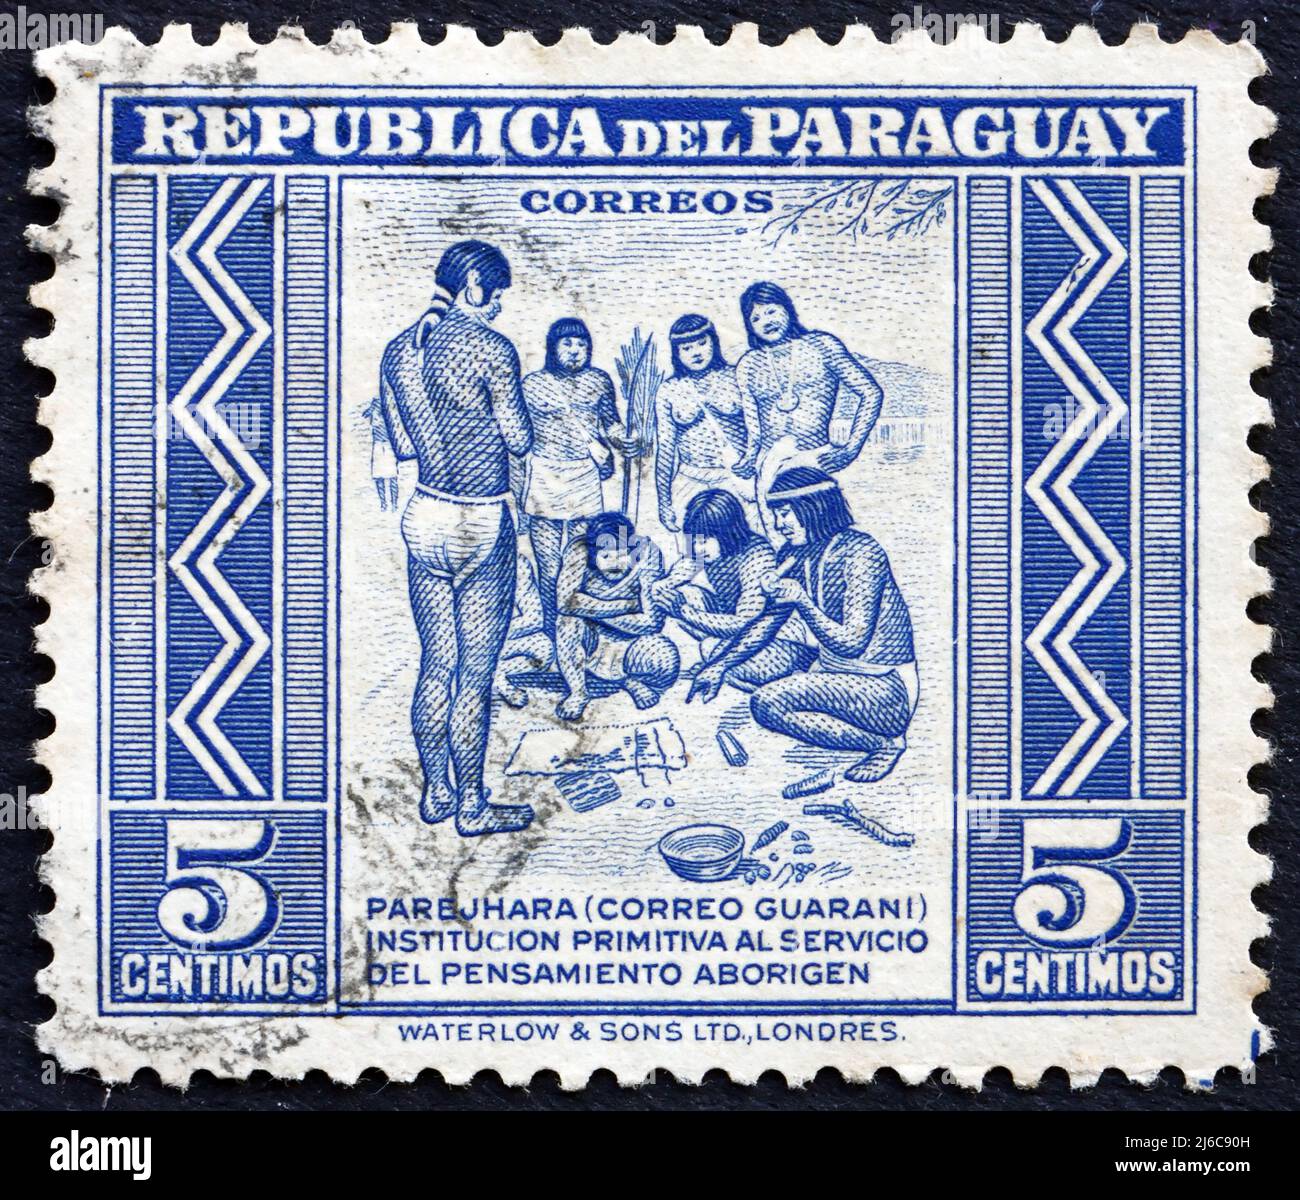 PARAGUAY - CIRCA 1946: a stamp printed in Paraguay shows Primitive Postal Service among Indians, circa 1946 Stock Photo